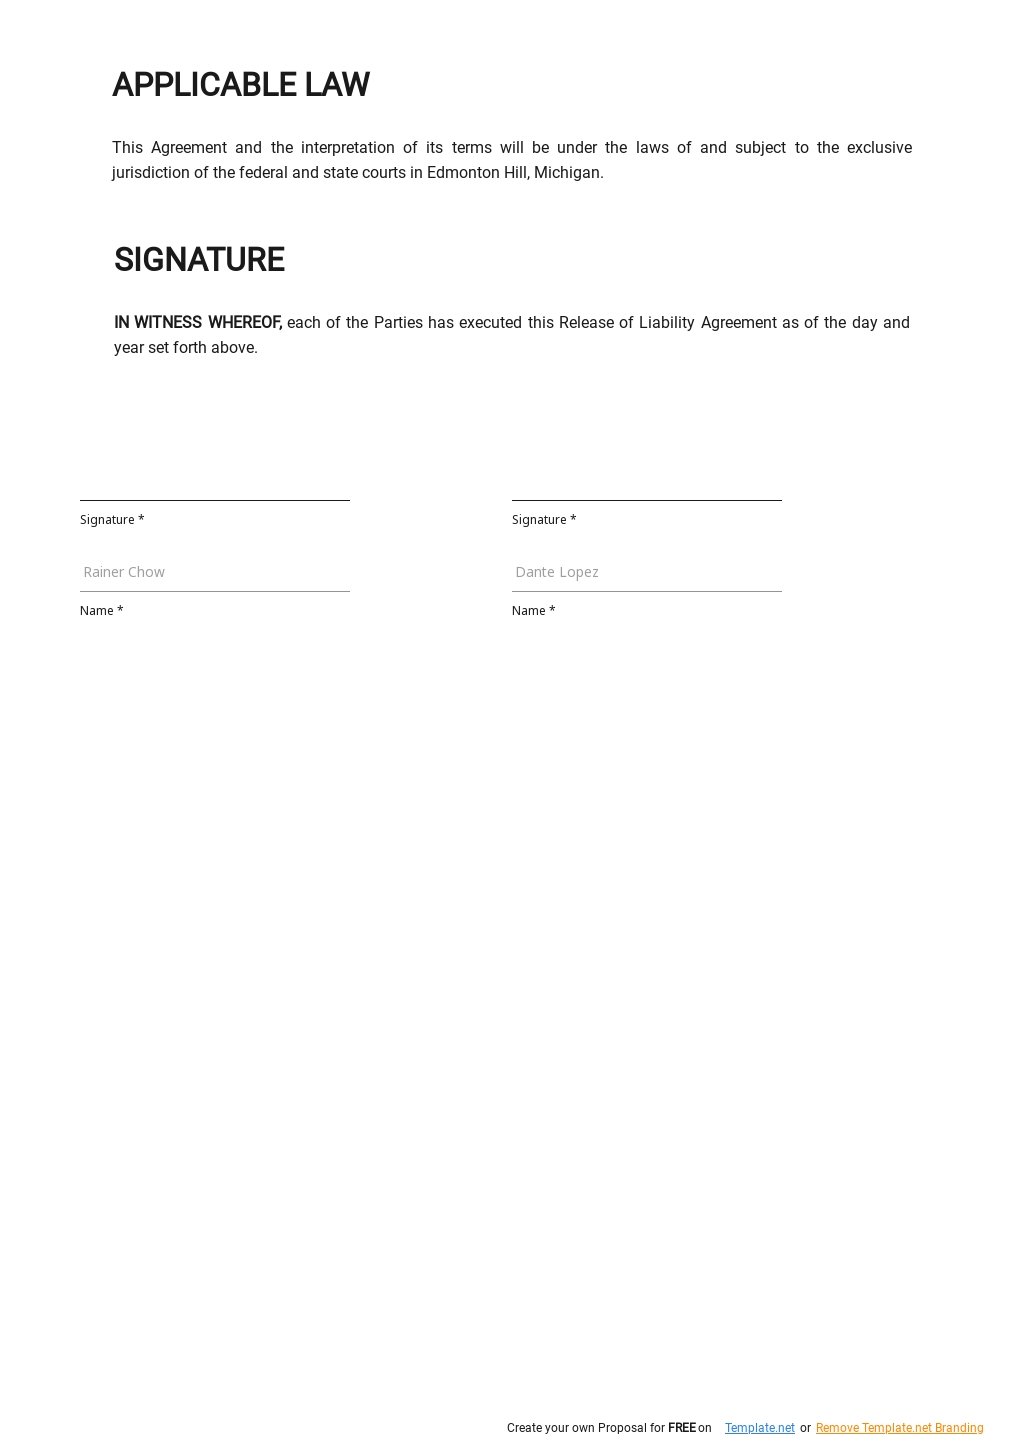 Release of Liability Agreement Template 2.jpe